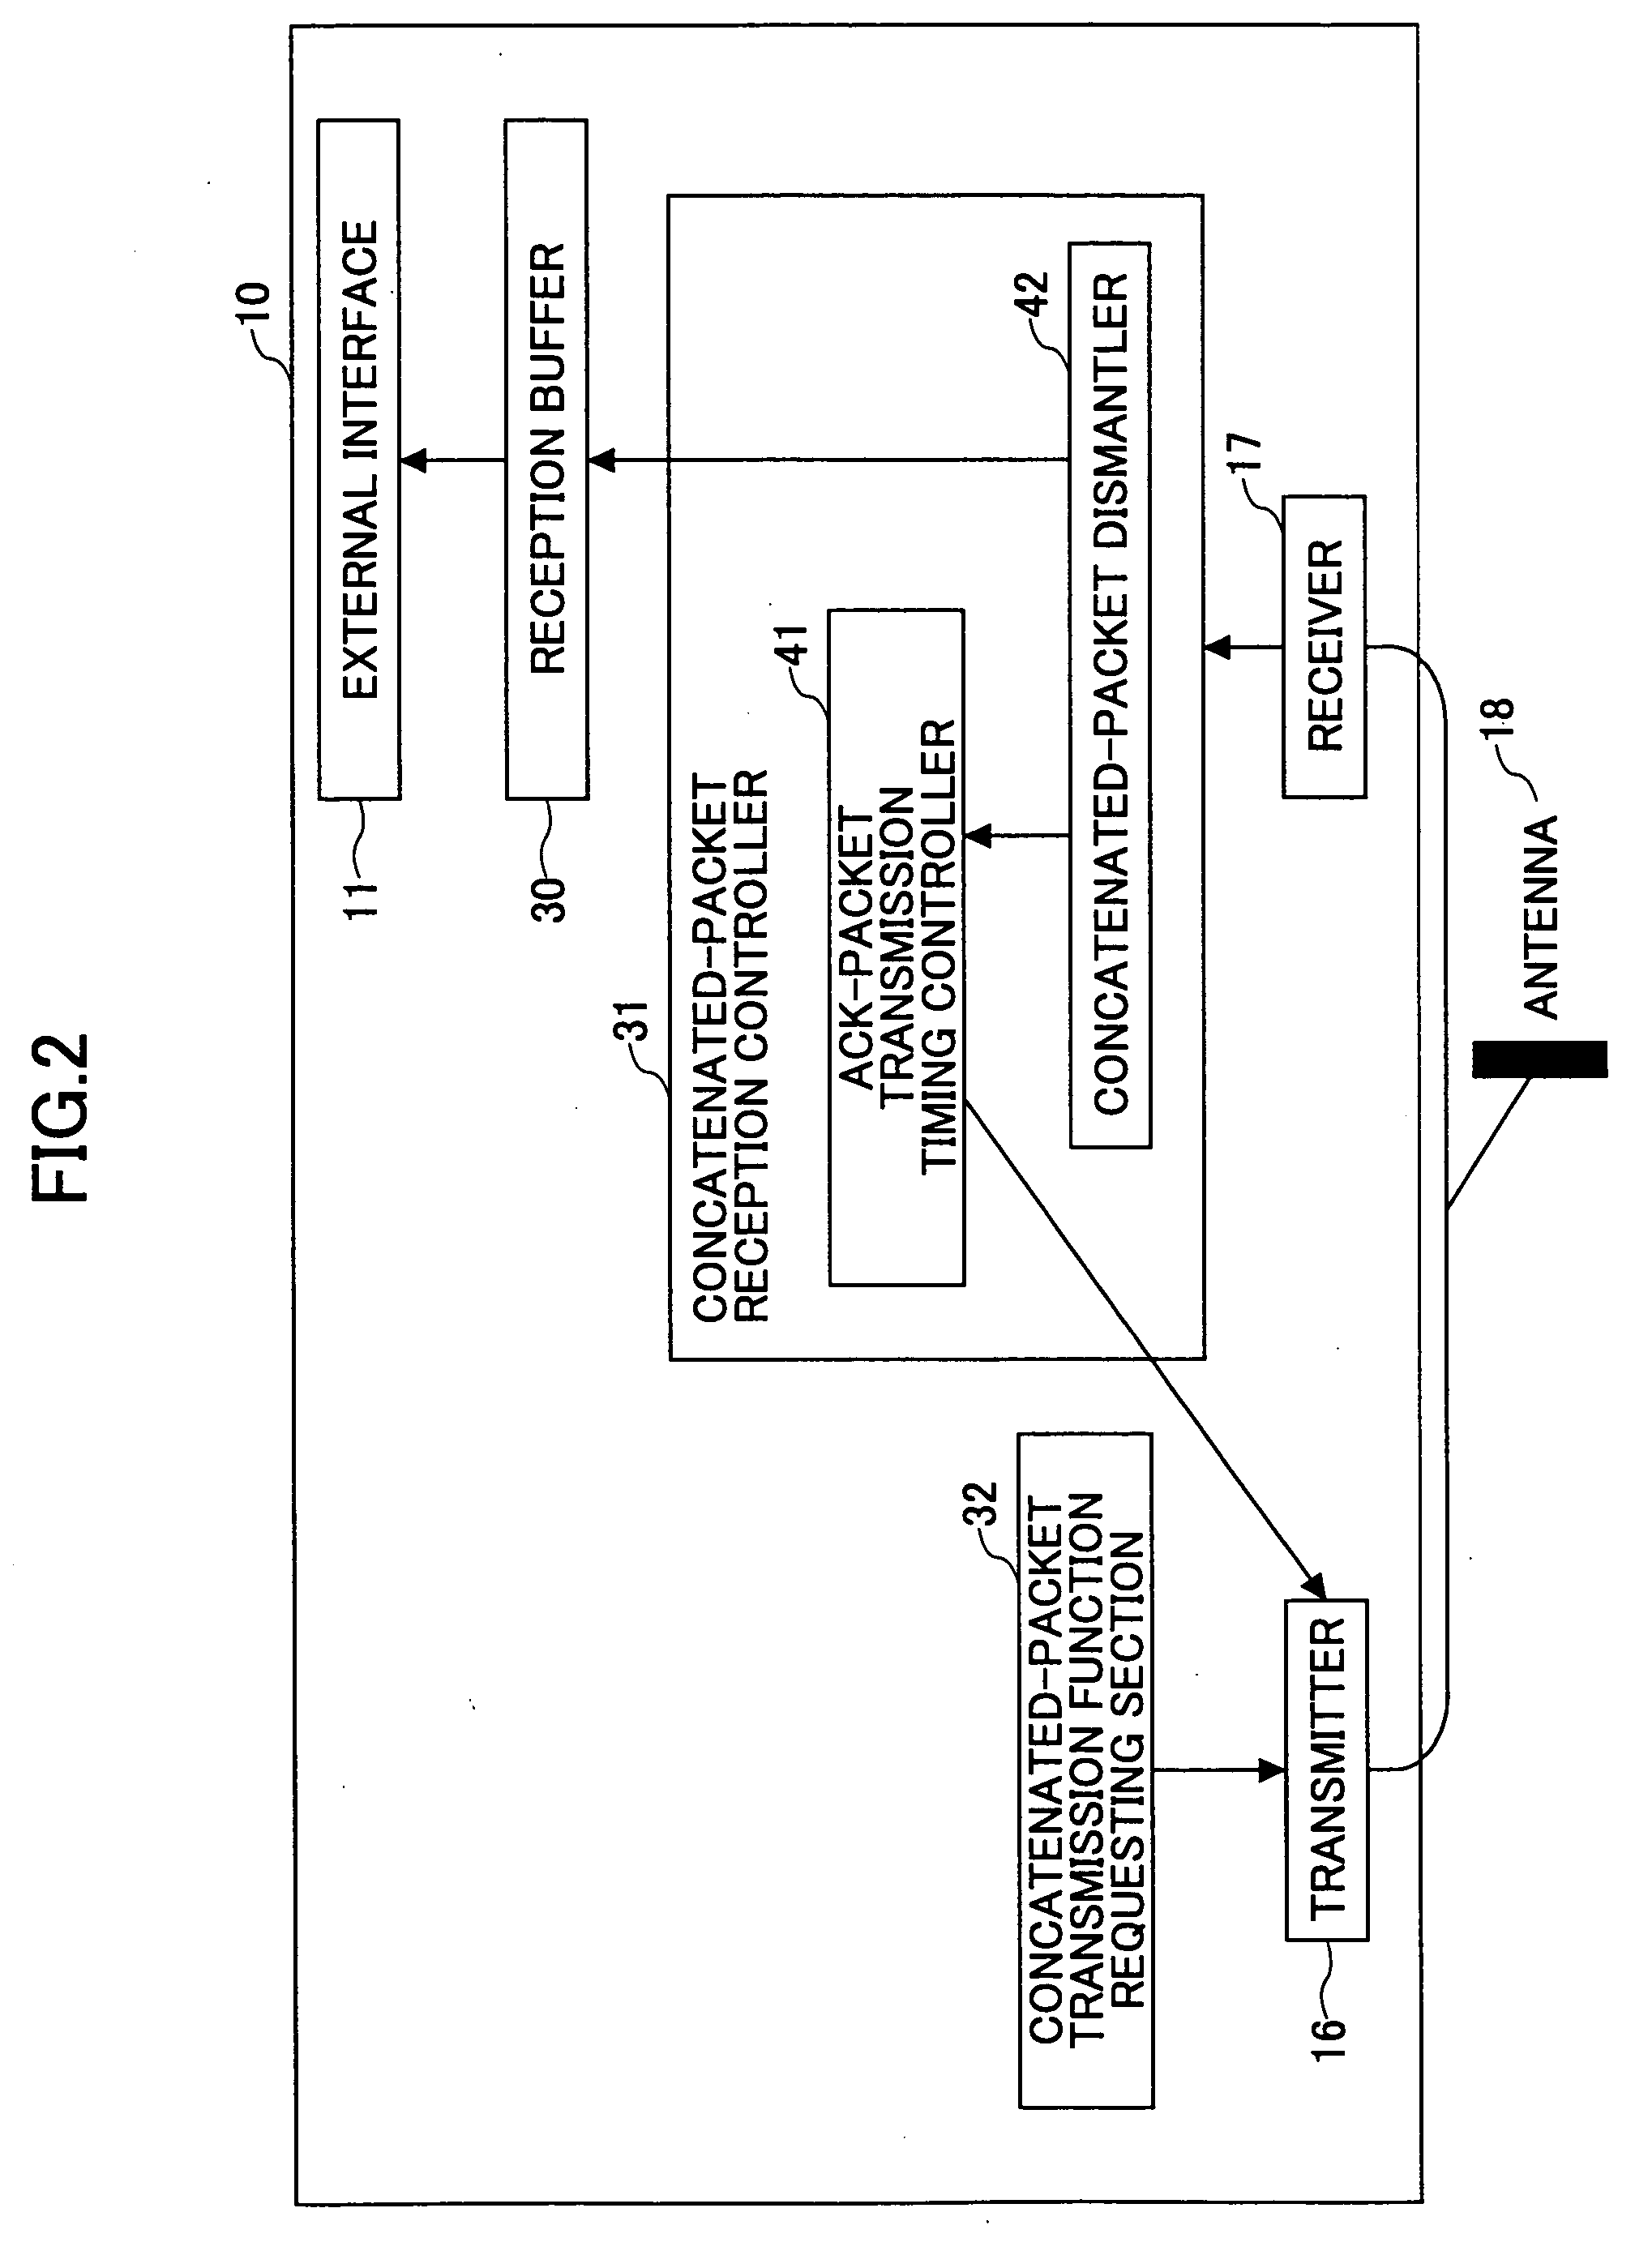 Wireless packet communication apparatus and method